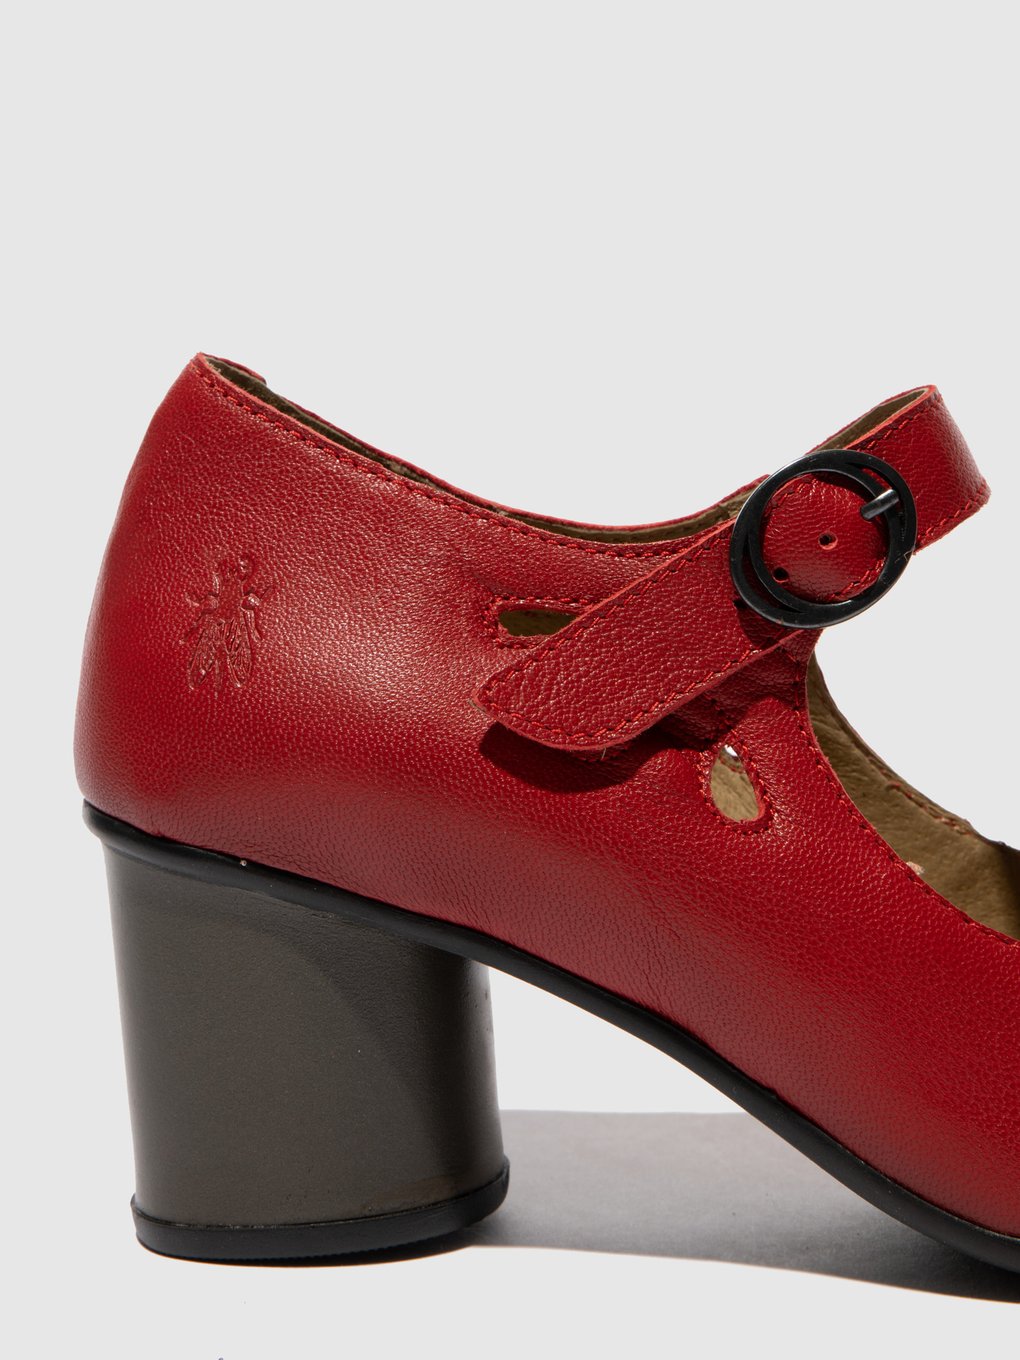 Fly London Sloe lipstick Red Mary Jane heel shoe. Only size 8